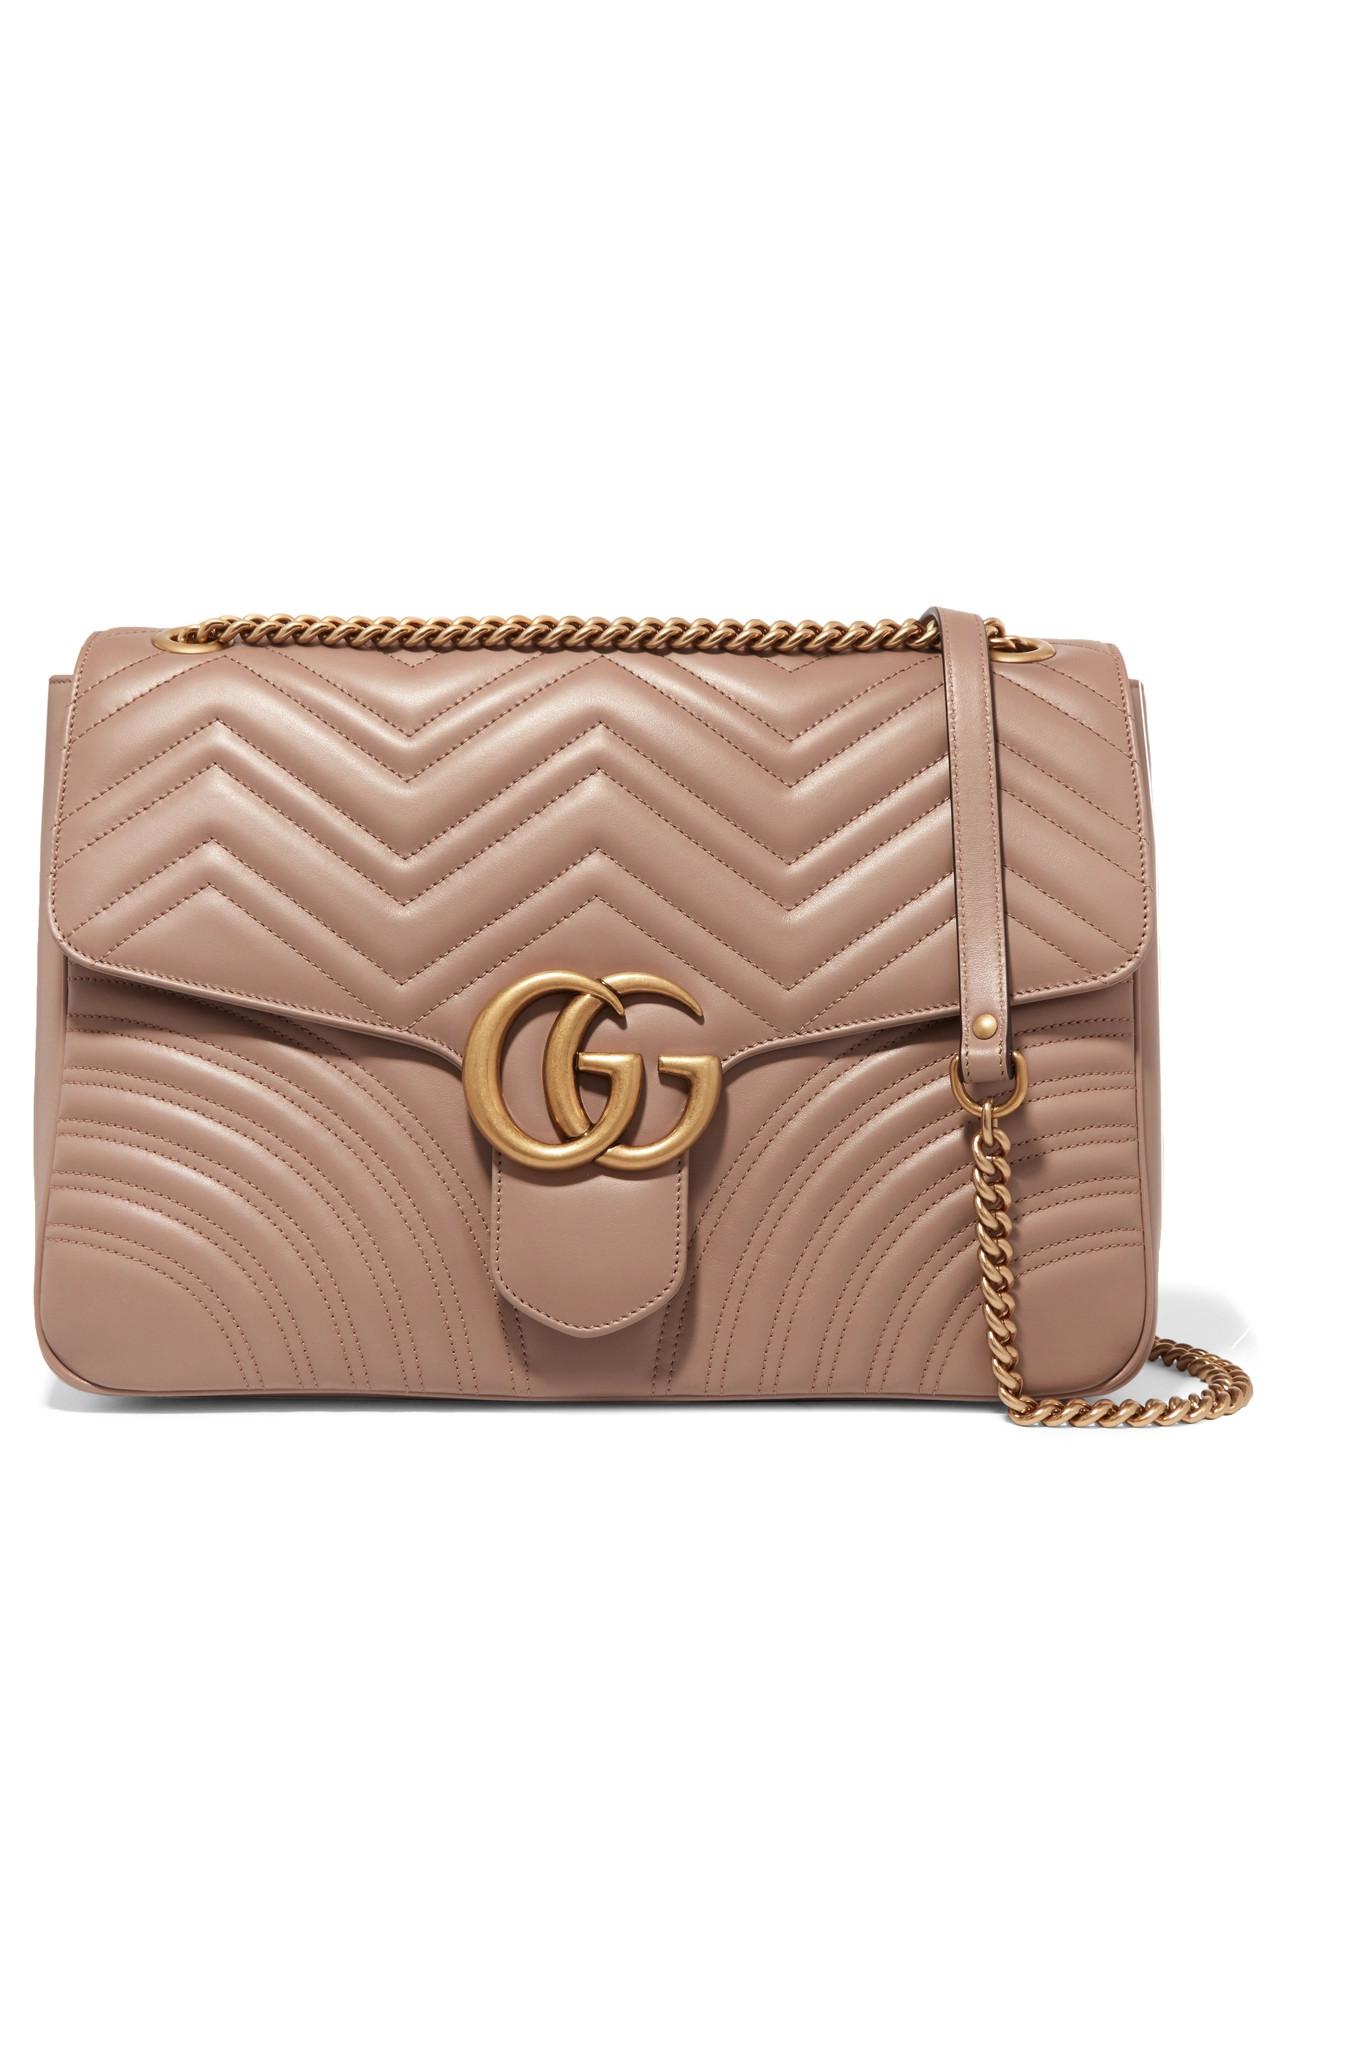 Gucci Gg Marmont Large Quilted Leather Shoulder Bag in Beige (Natural) - Lyst